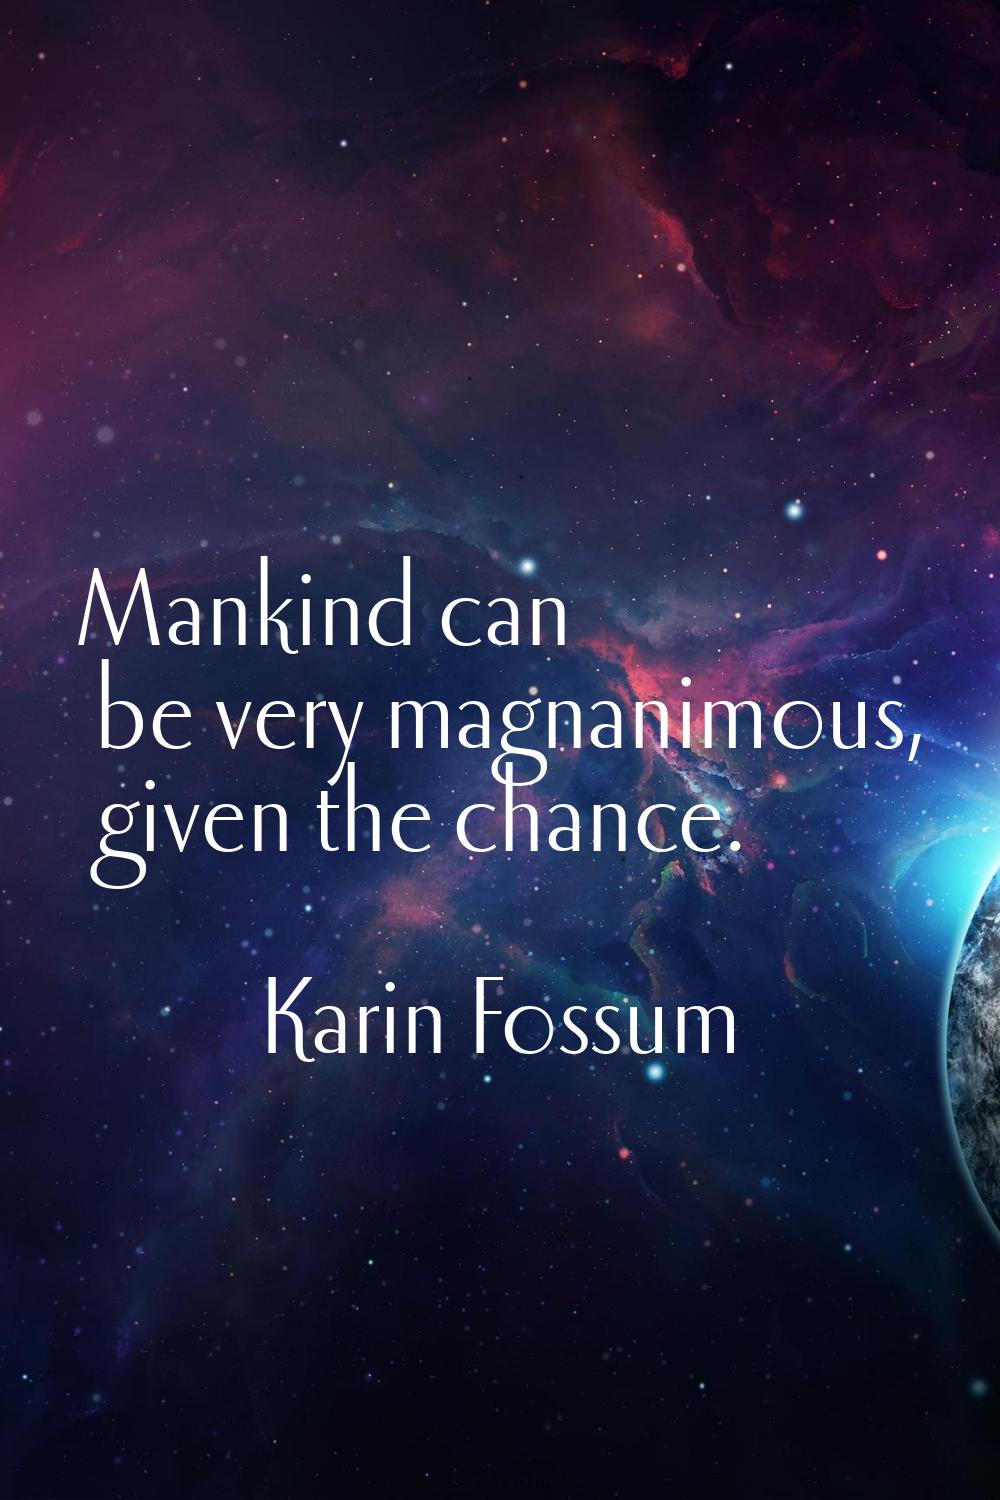 Mankind can be very magnanimous, given the chance.